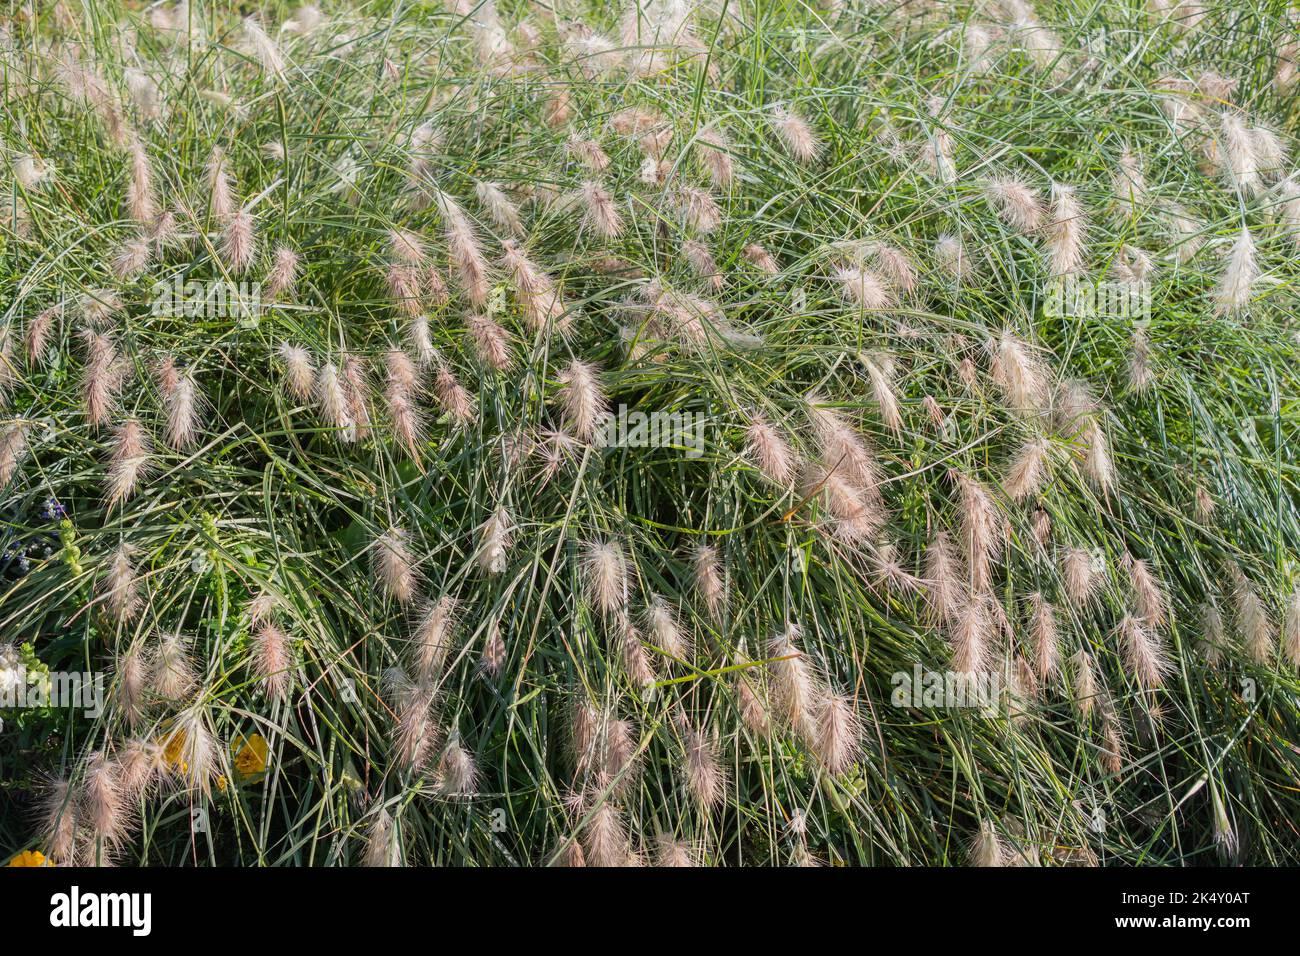 cenchrus-longisetus-commonly-feathertop-grass-species-of-buffelgrasses-family-long-style-plant-2K4Y0AT.jpg